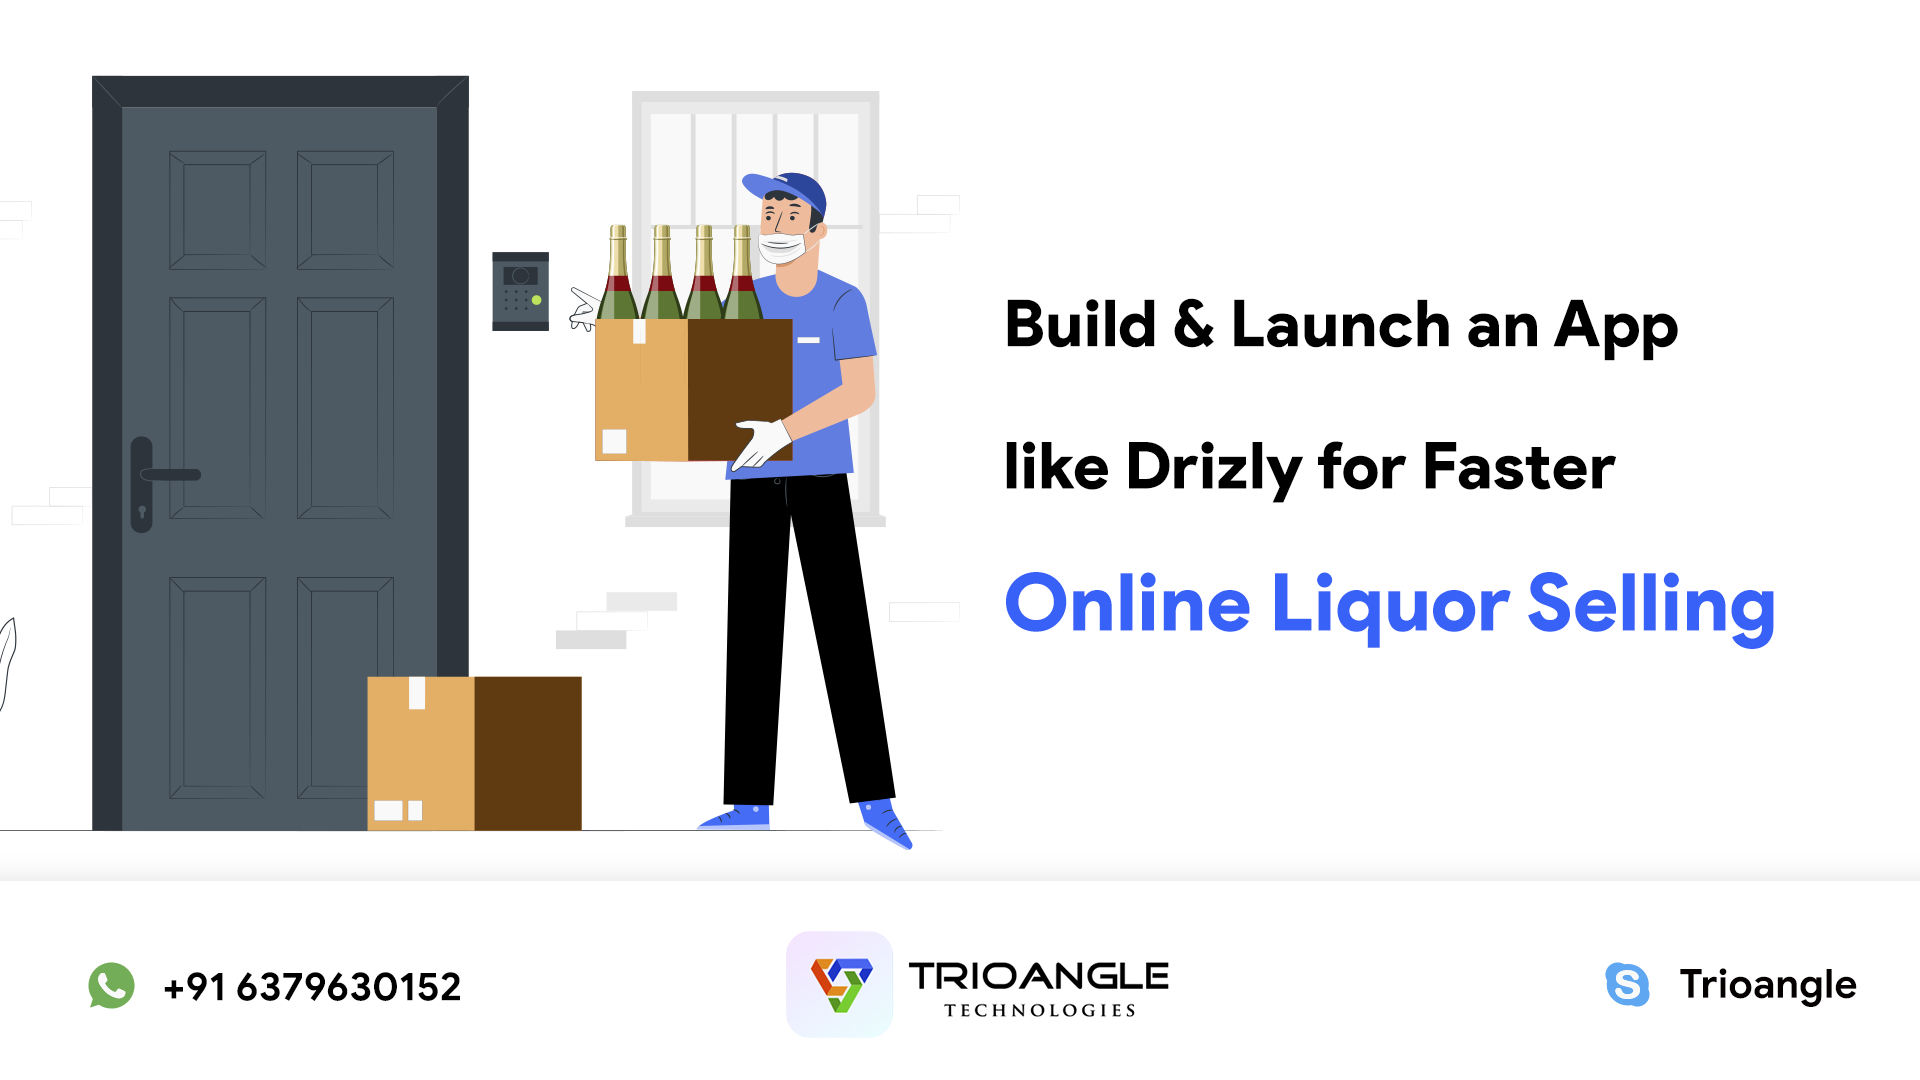 Build & Launch an App like Drizly for Faster Online Liquor Selling